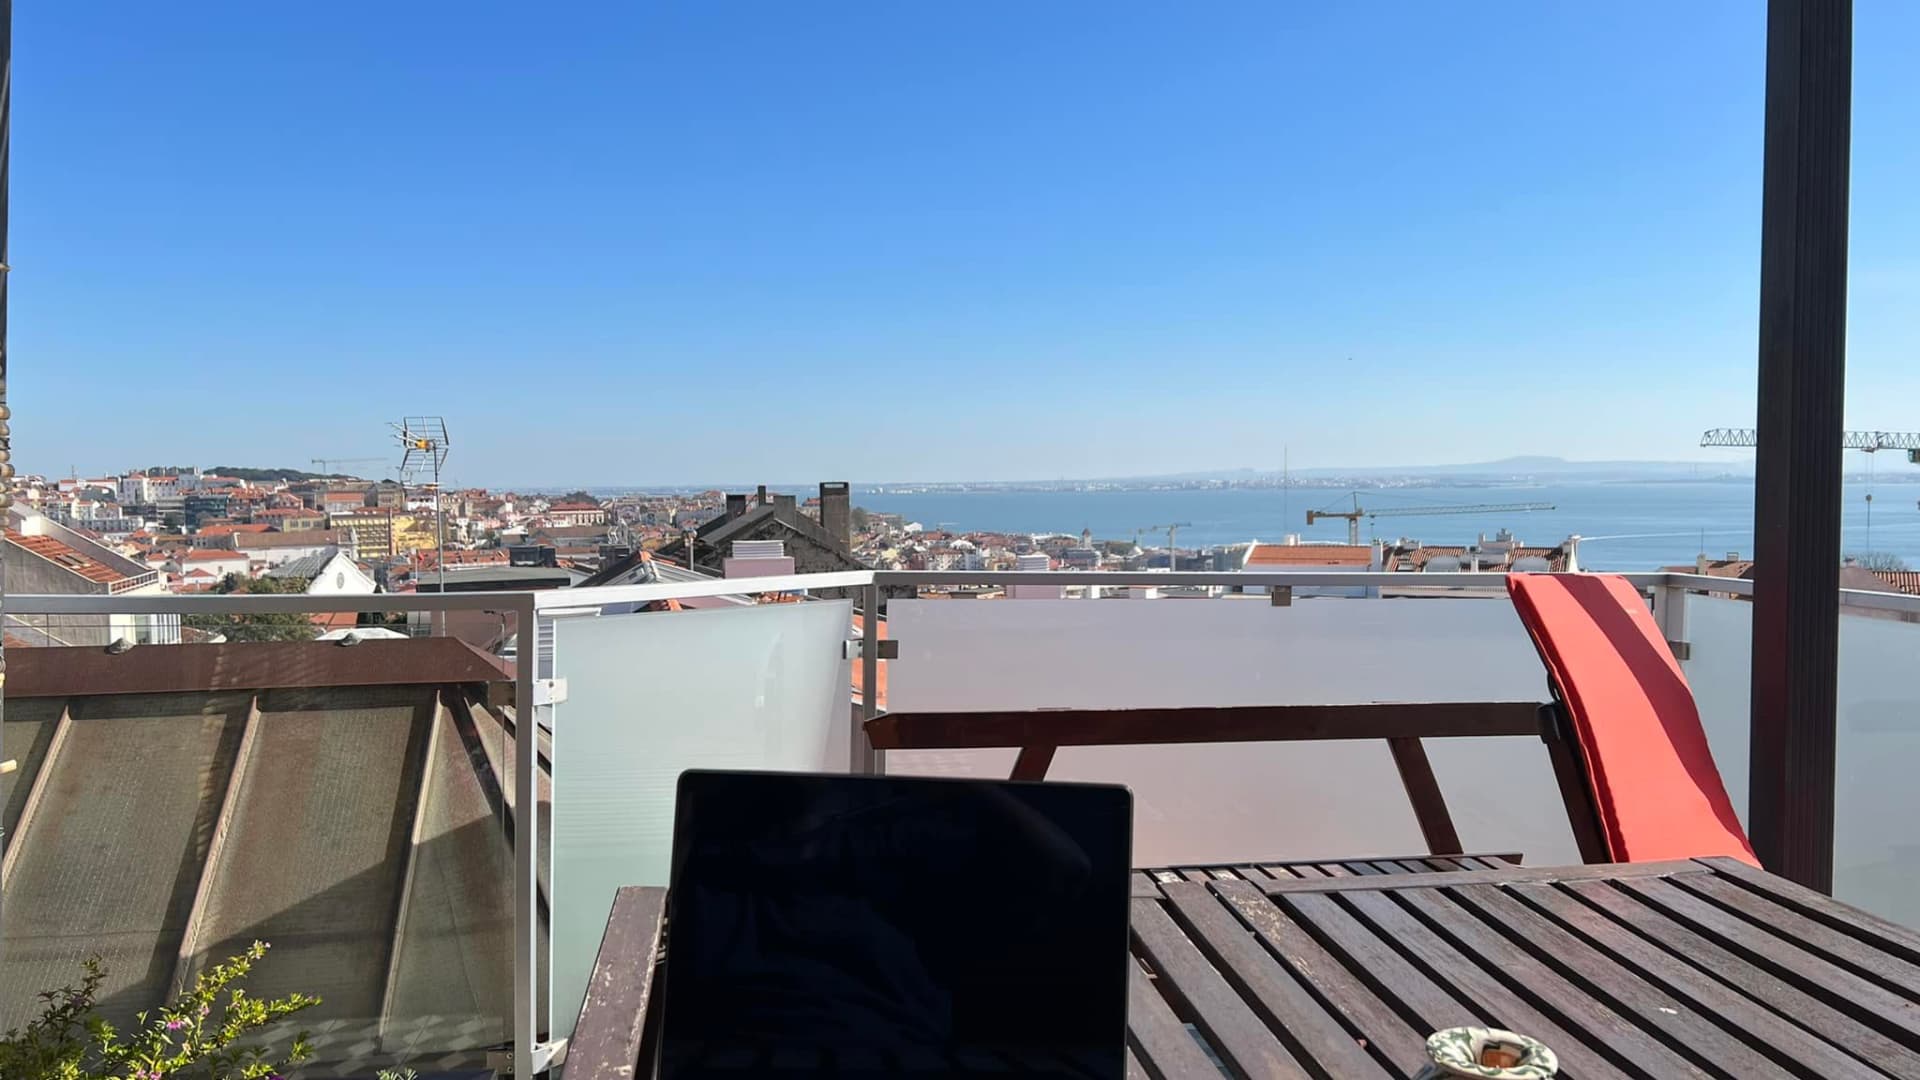 Running an online business allows Kimanzi and his wife to work from anywhere, like this rooftop in Lisbon, Portugal.